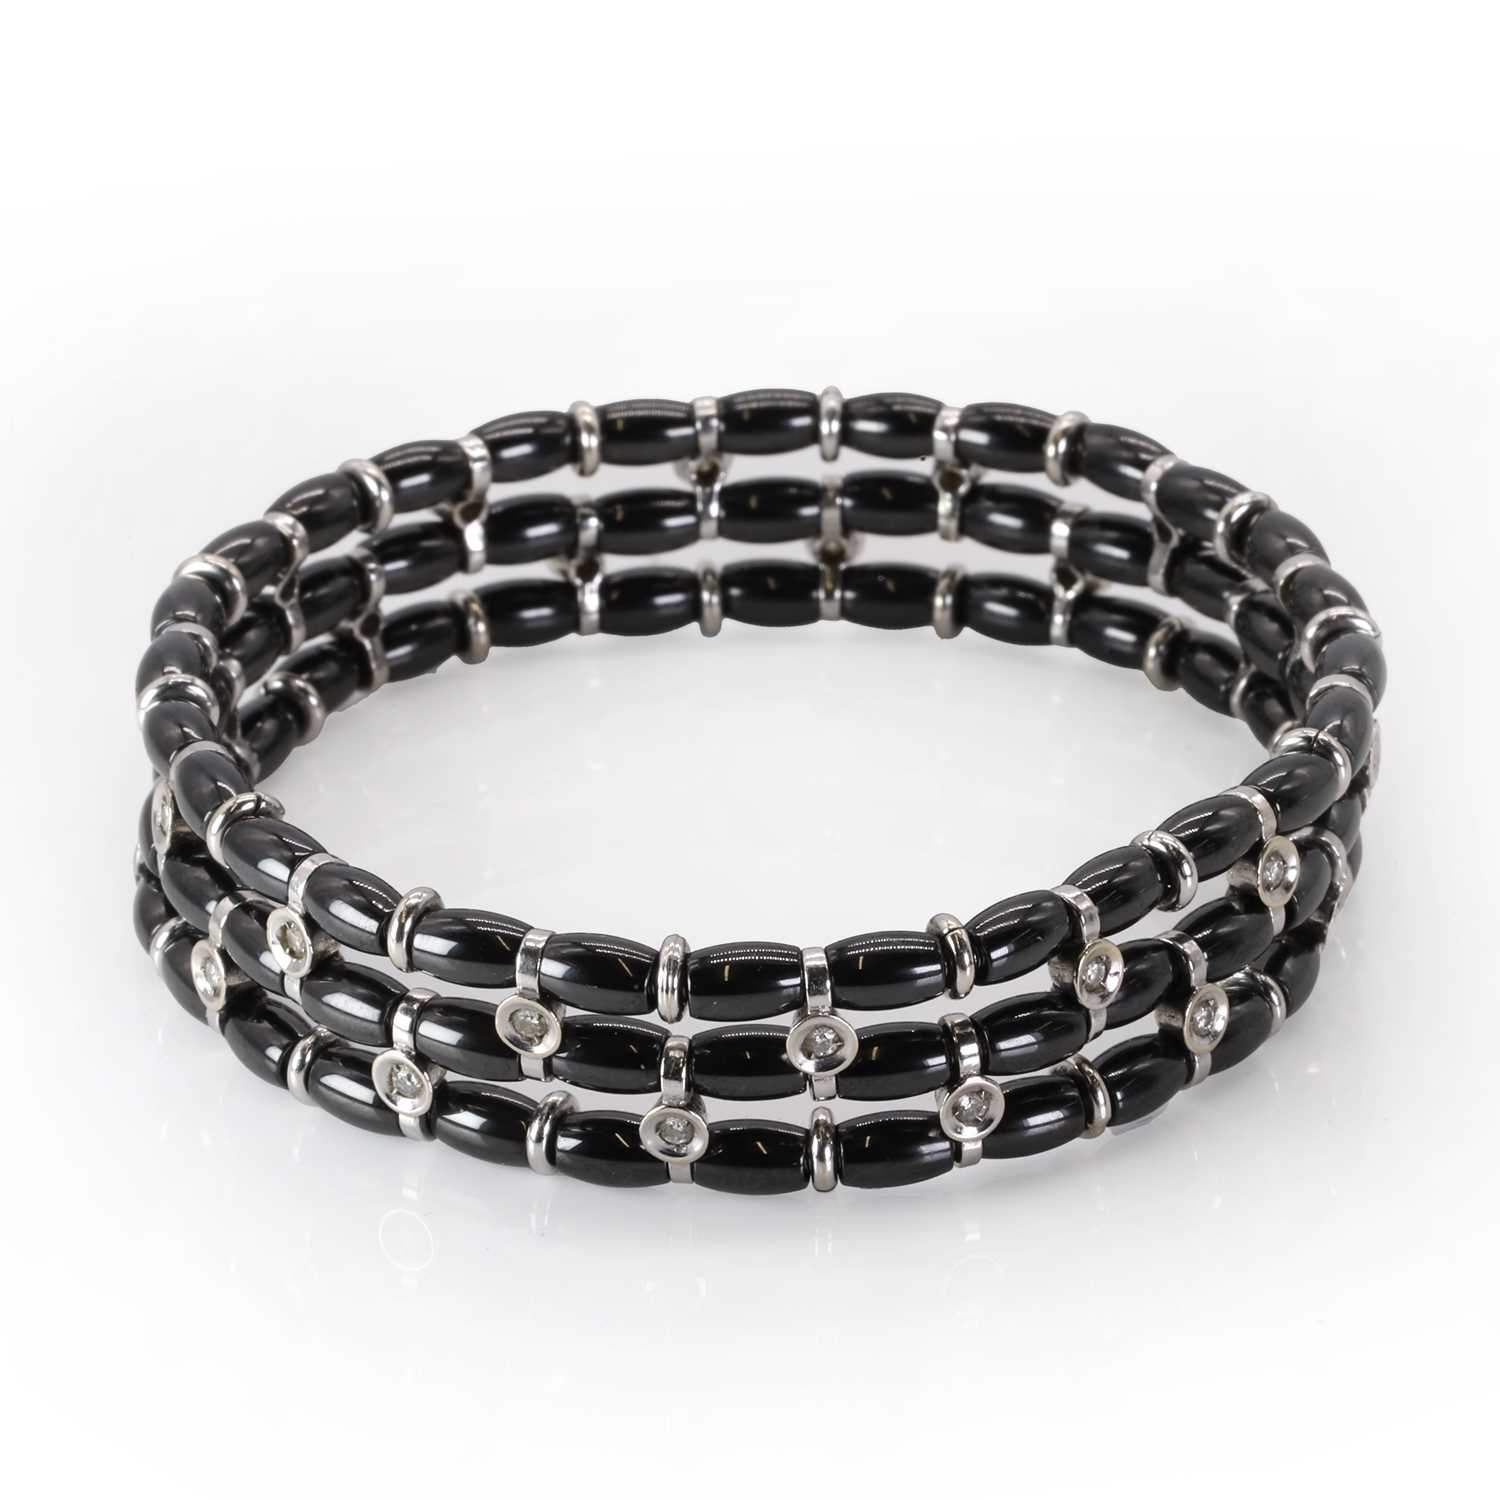 A white gold diamond and black ceramic bead bracelet, by Jarretiere, - Image 2 of 3